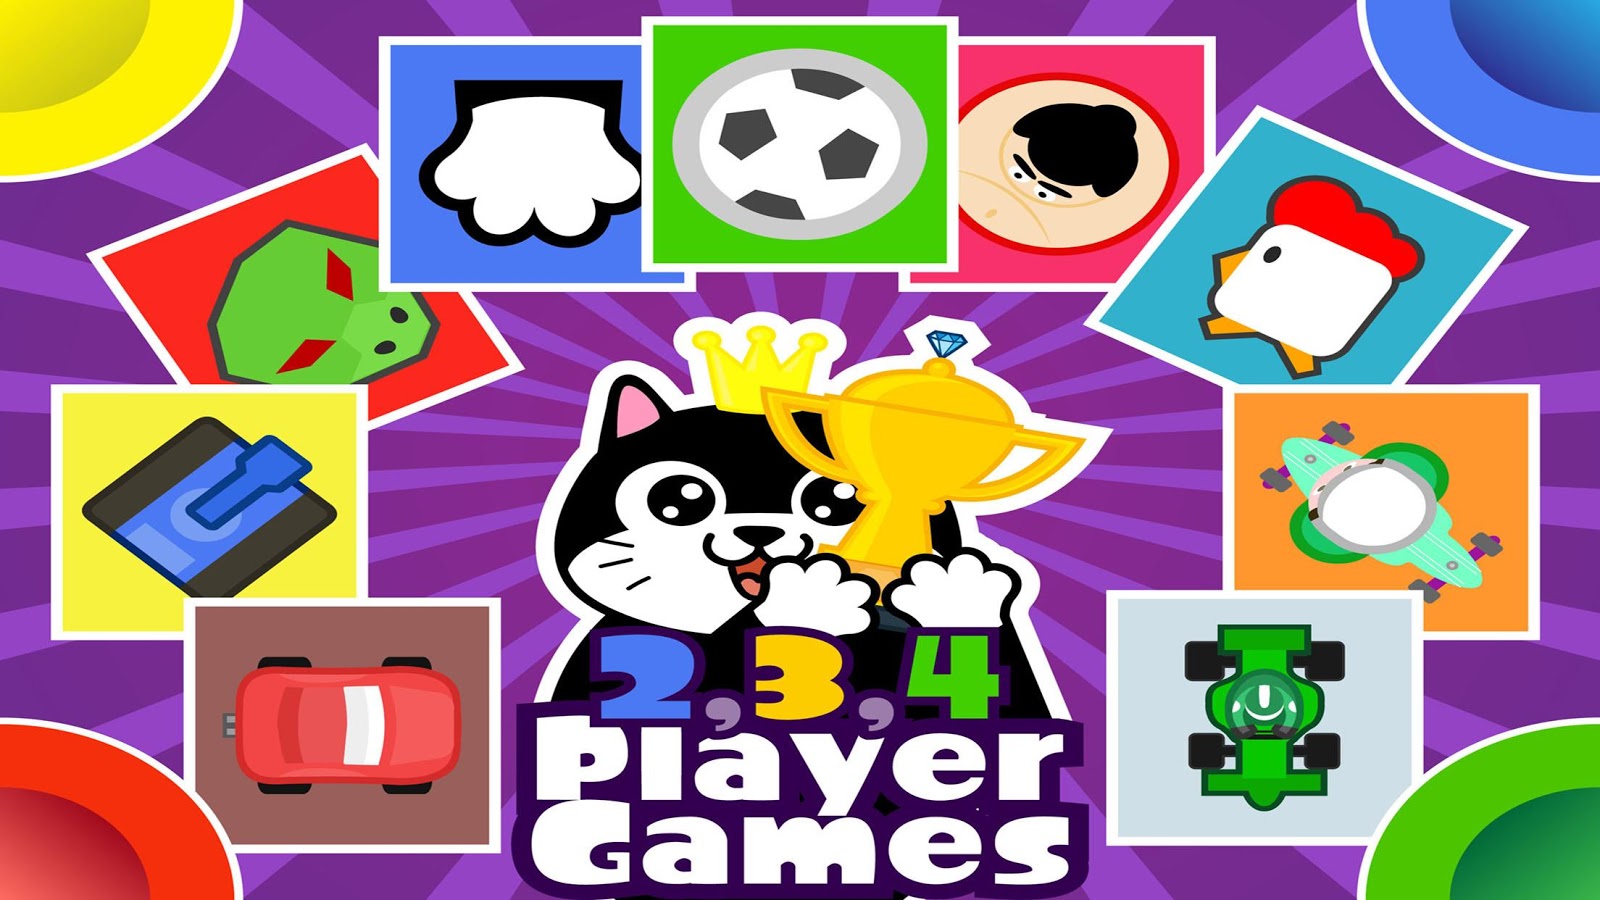 2 3 4 Player Games 2.1.9